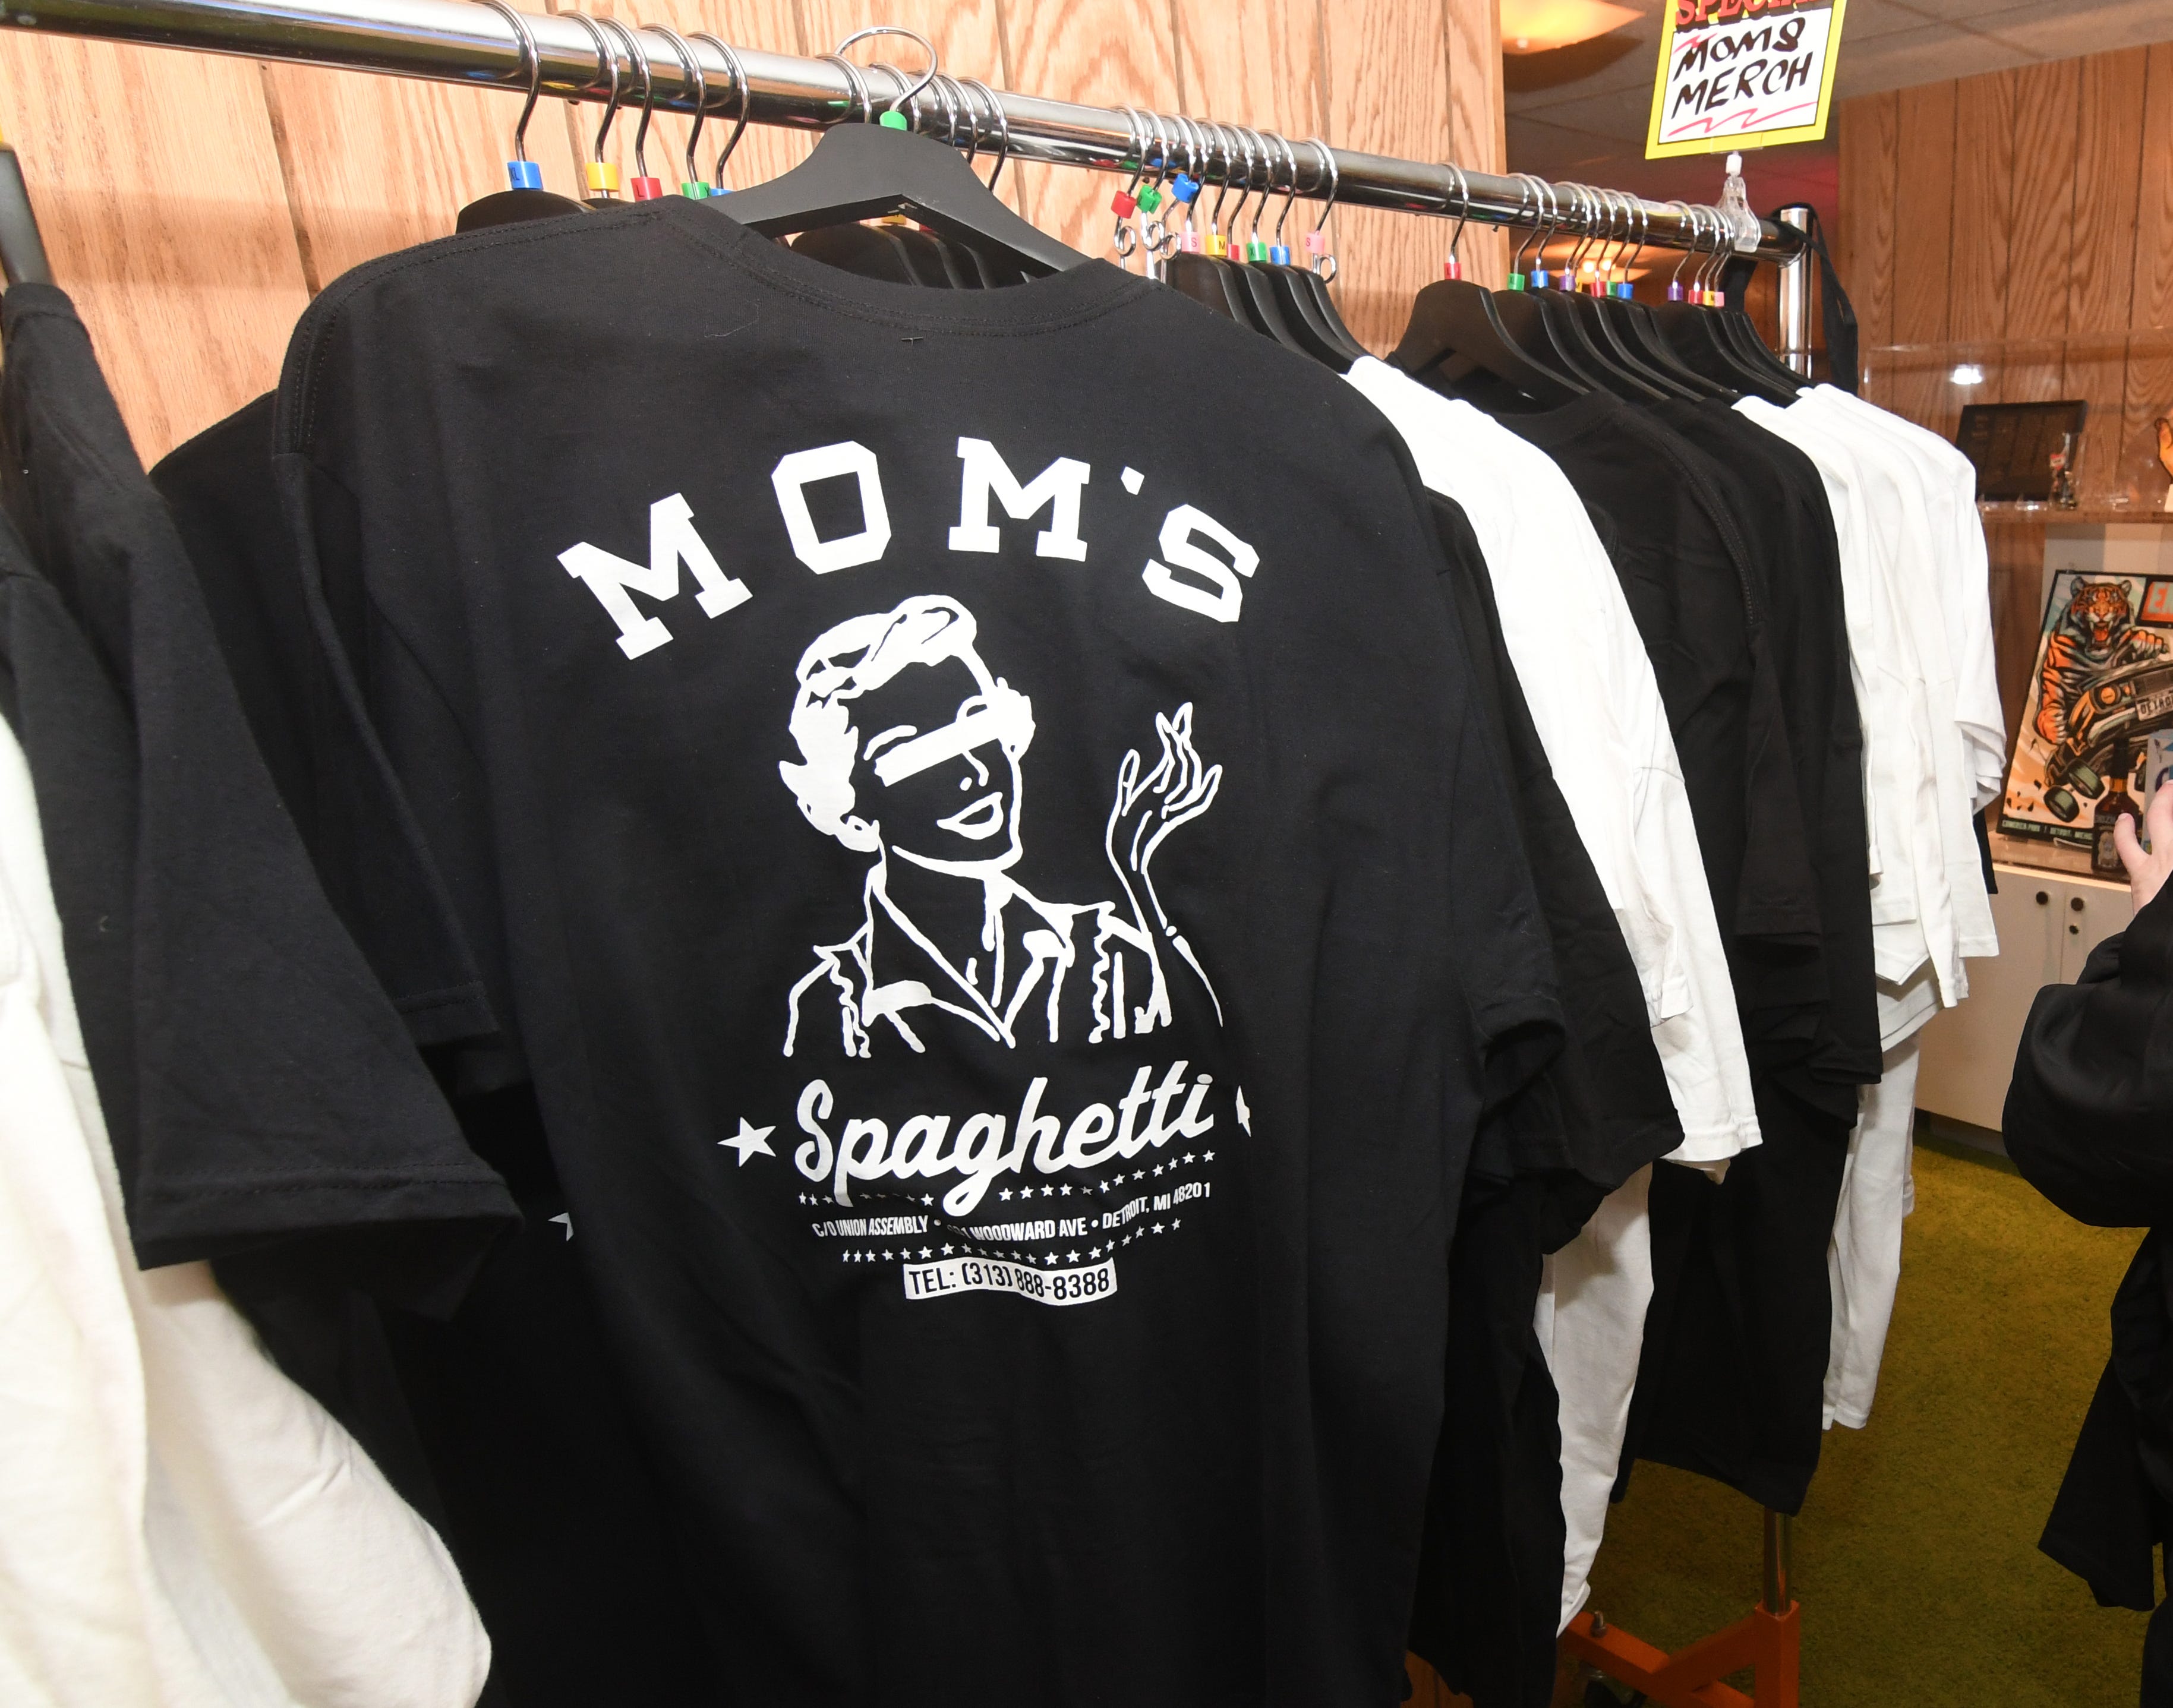 Mom's Spaghetti T-shirts are a hot seller at The Trailer retail shop on Wednesday, September 29, 2021.